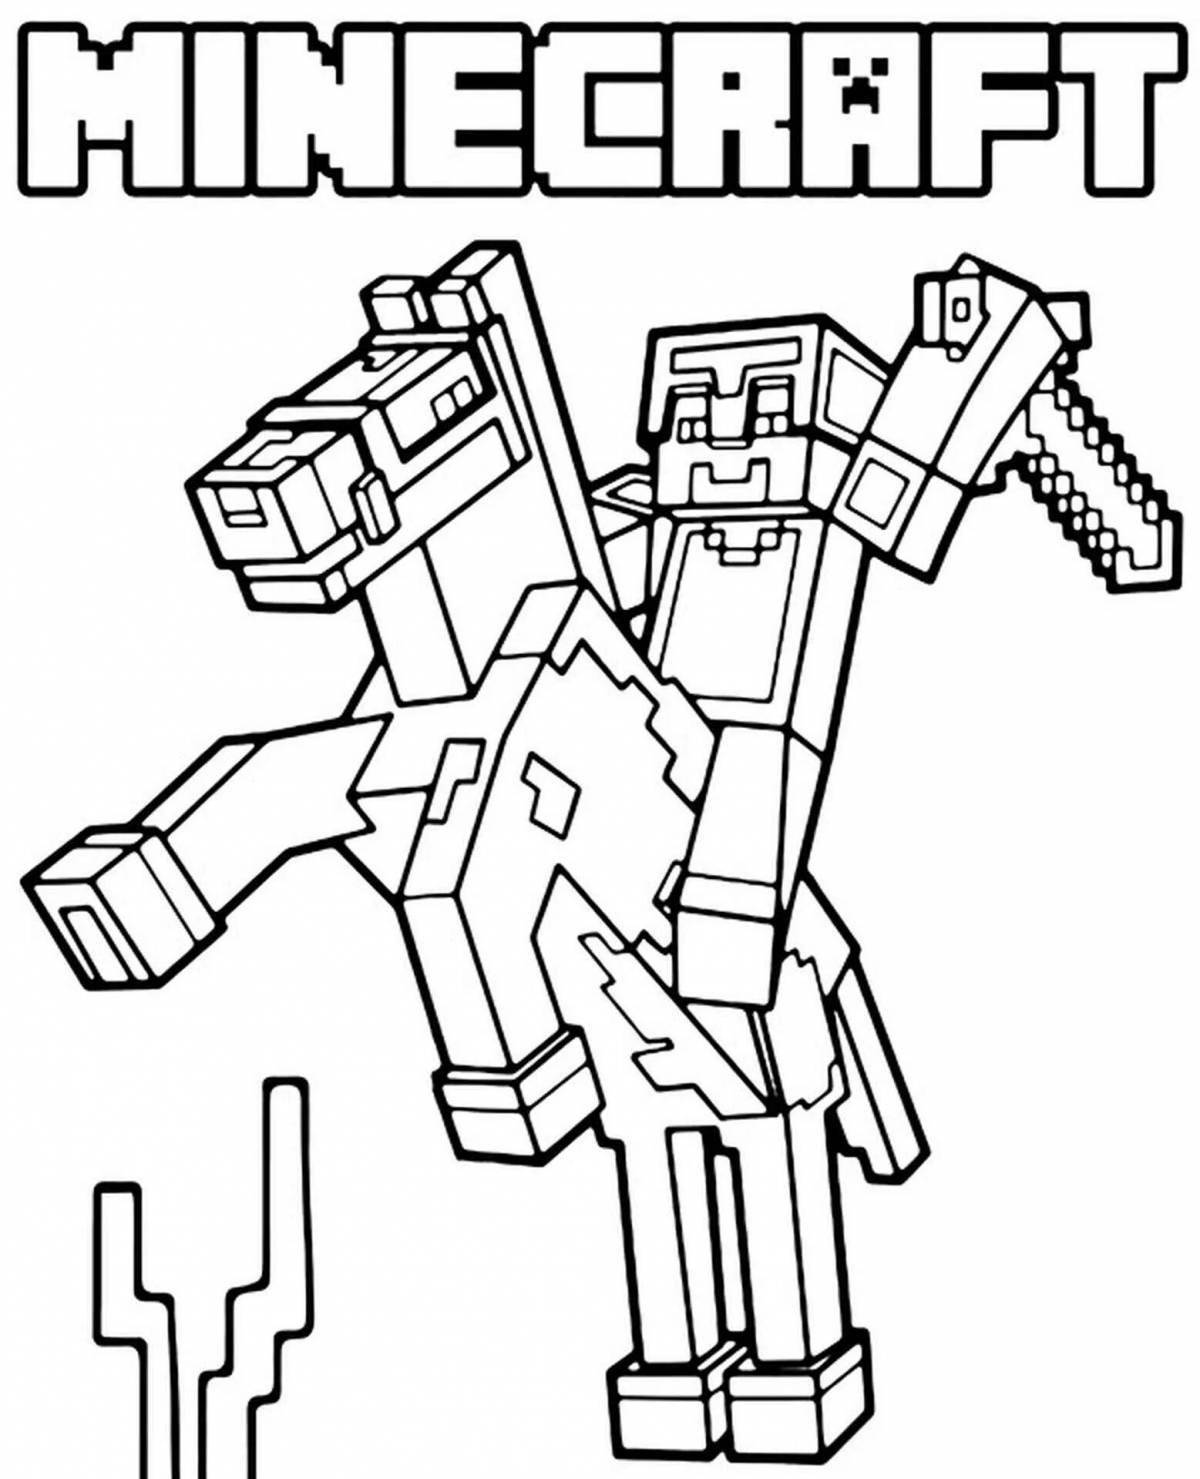 Adorable minecraft 3d coloring page